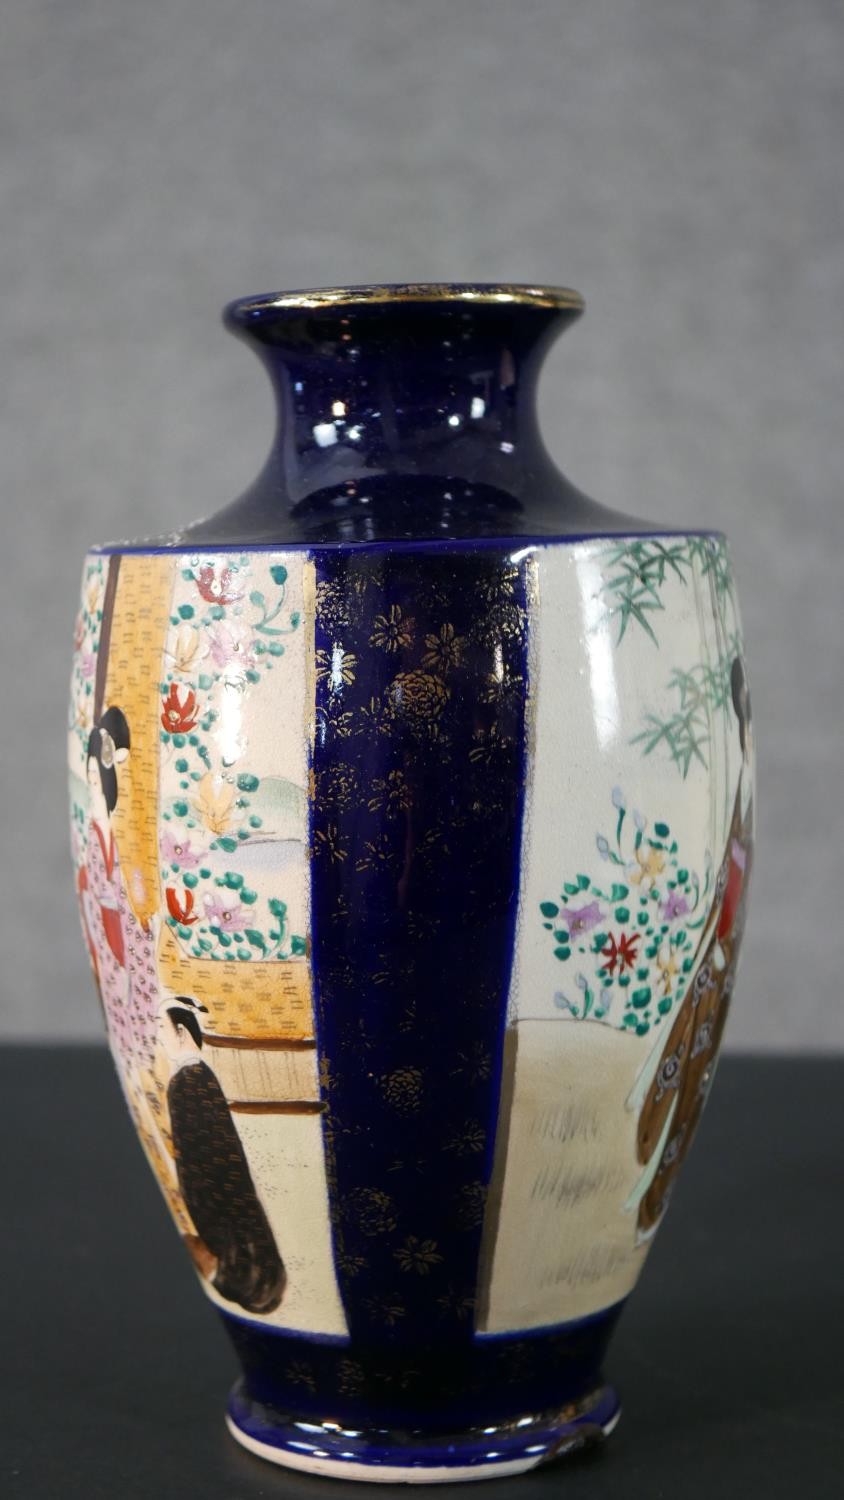 Two early 20th century hand painted and gilded Japanese Satsuma vases (one converted to a lamp) with - Image 4 of 17